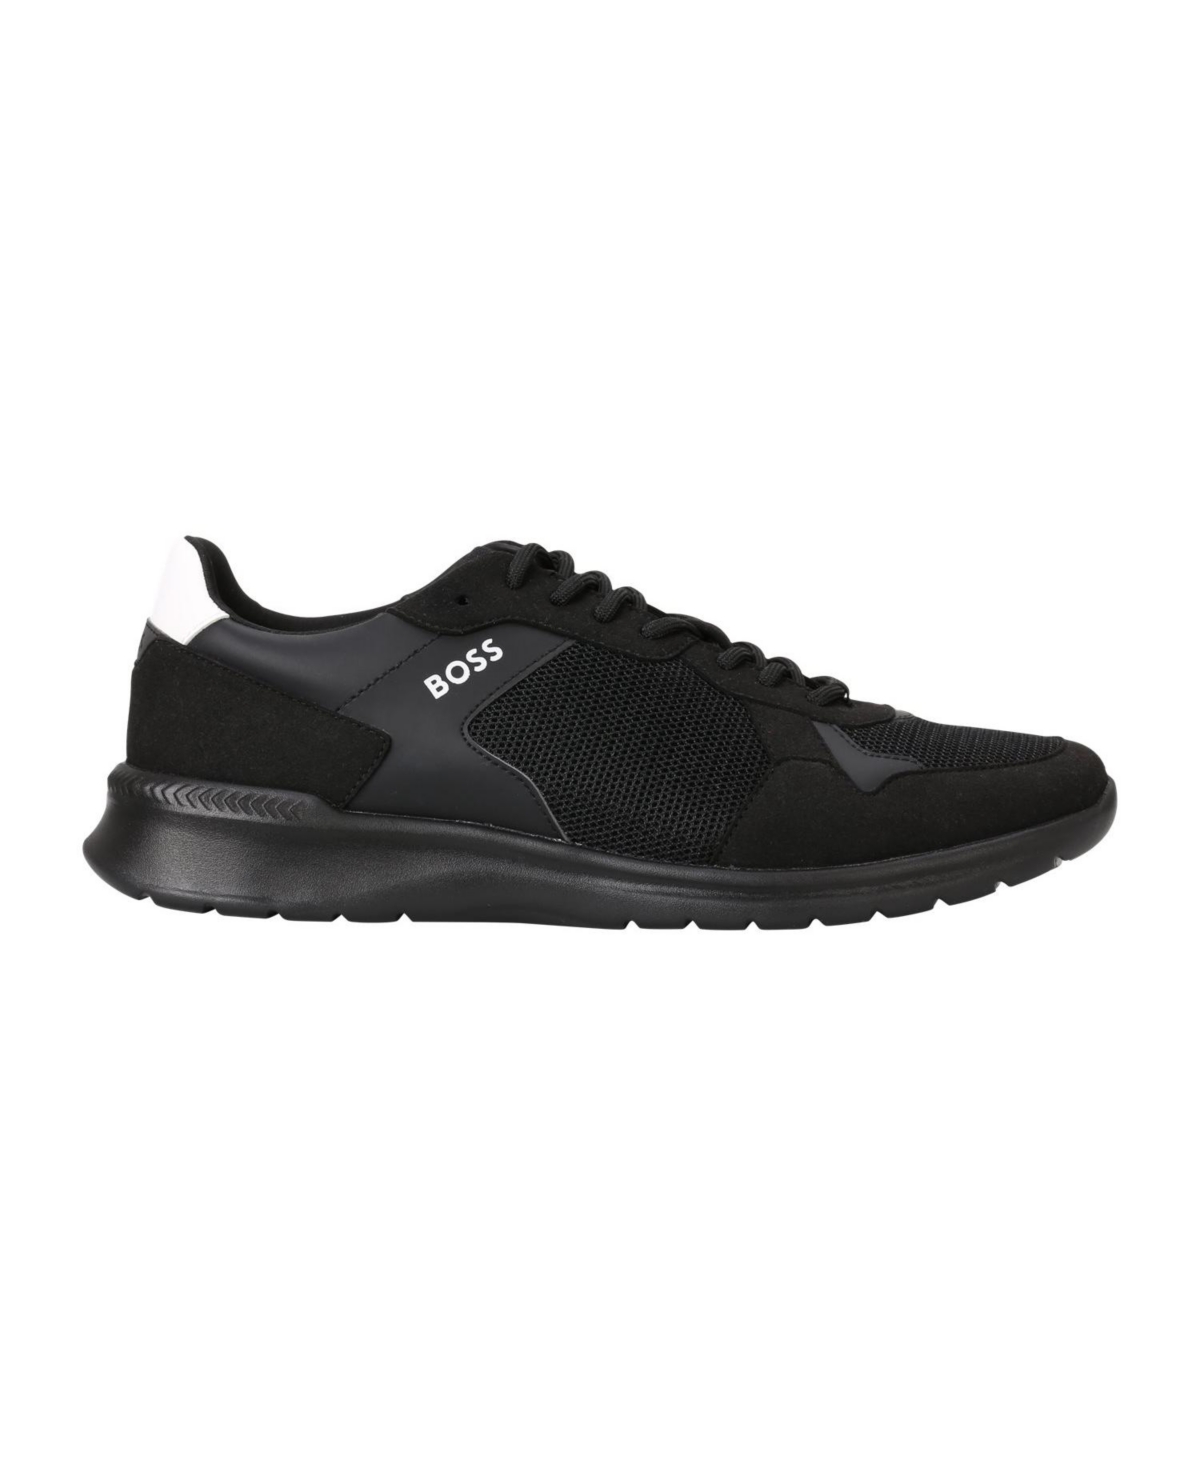 Hugo Boss Extreme Running Fashion Athletic Lace Up Sneaker In Black